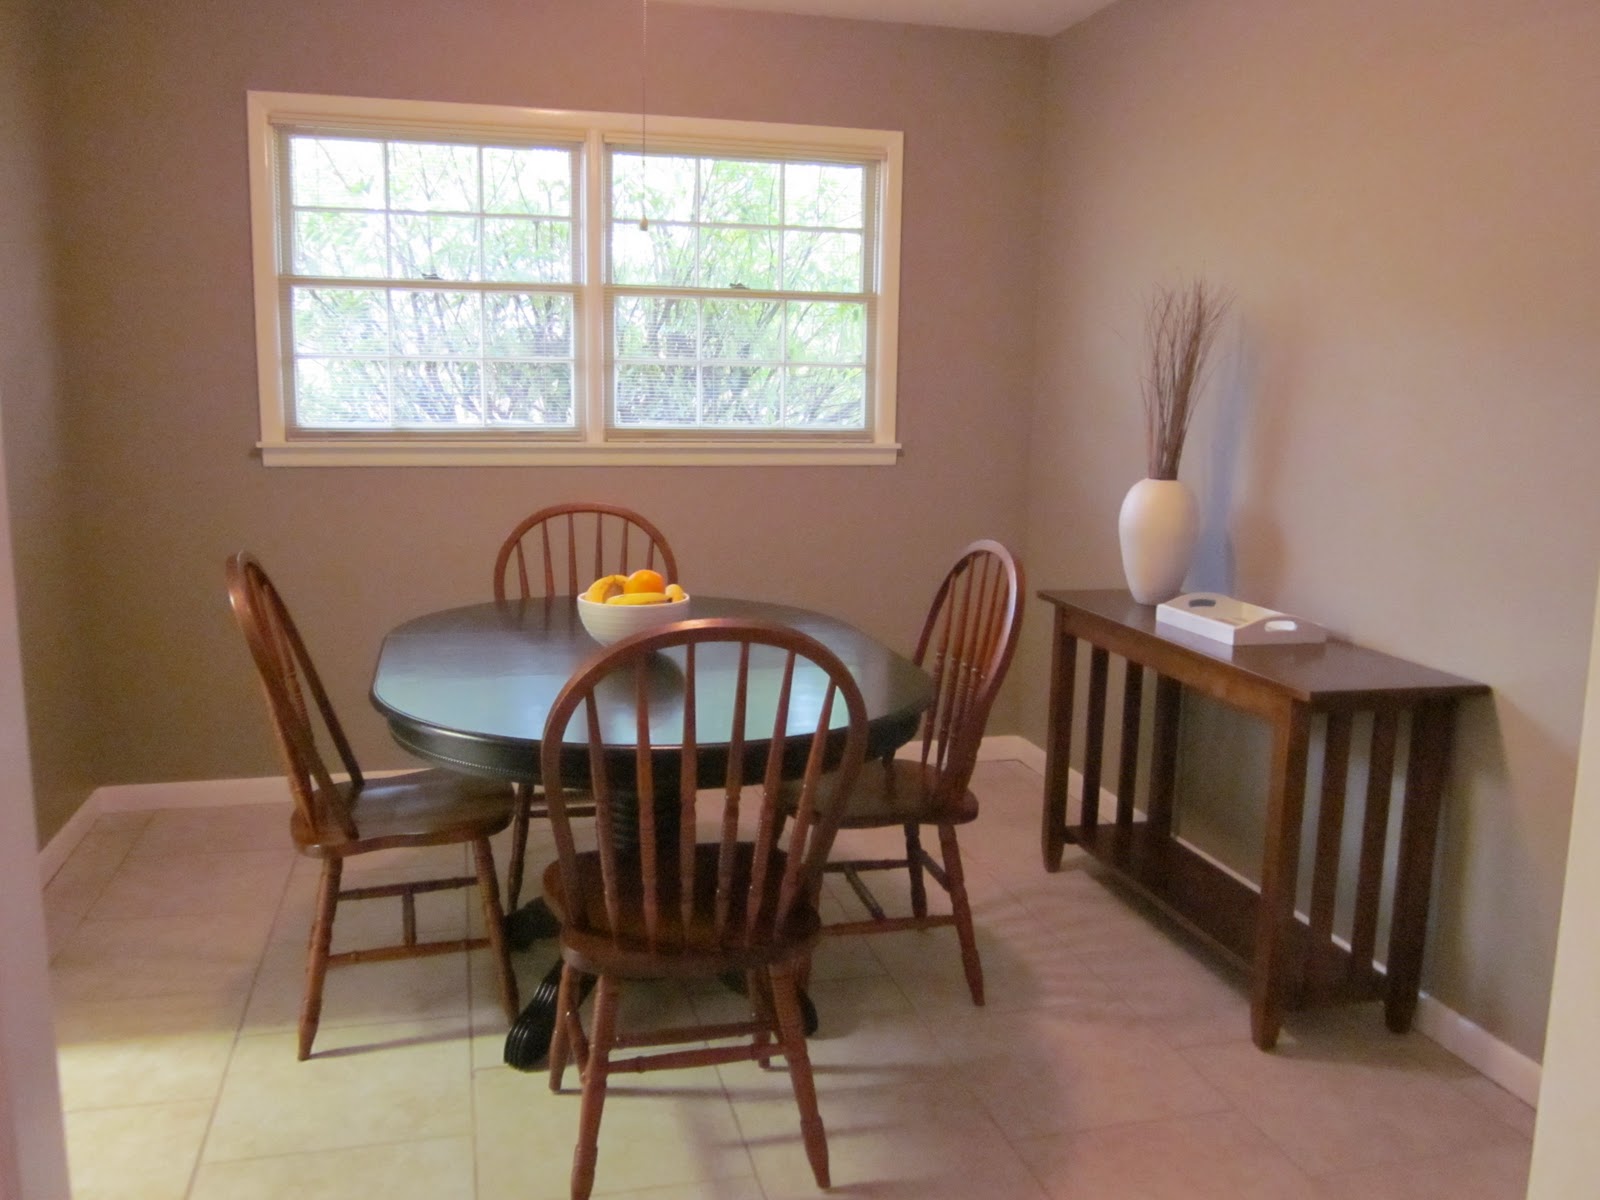 Nikkis' Nacs: dining room before and after {part 1}